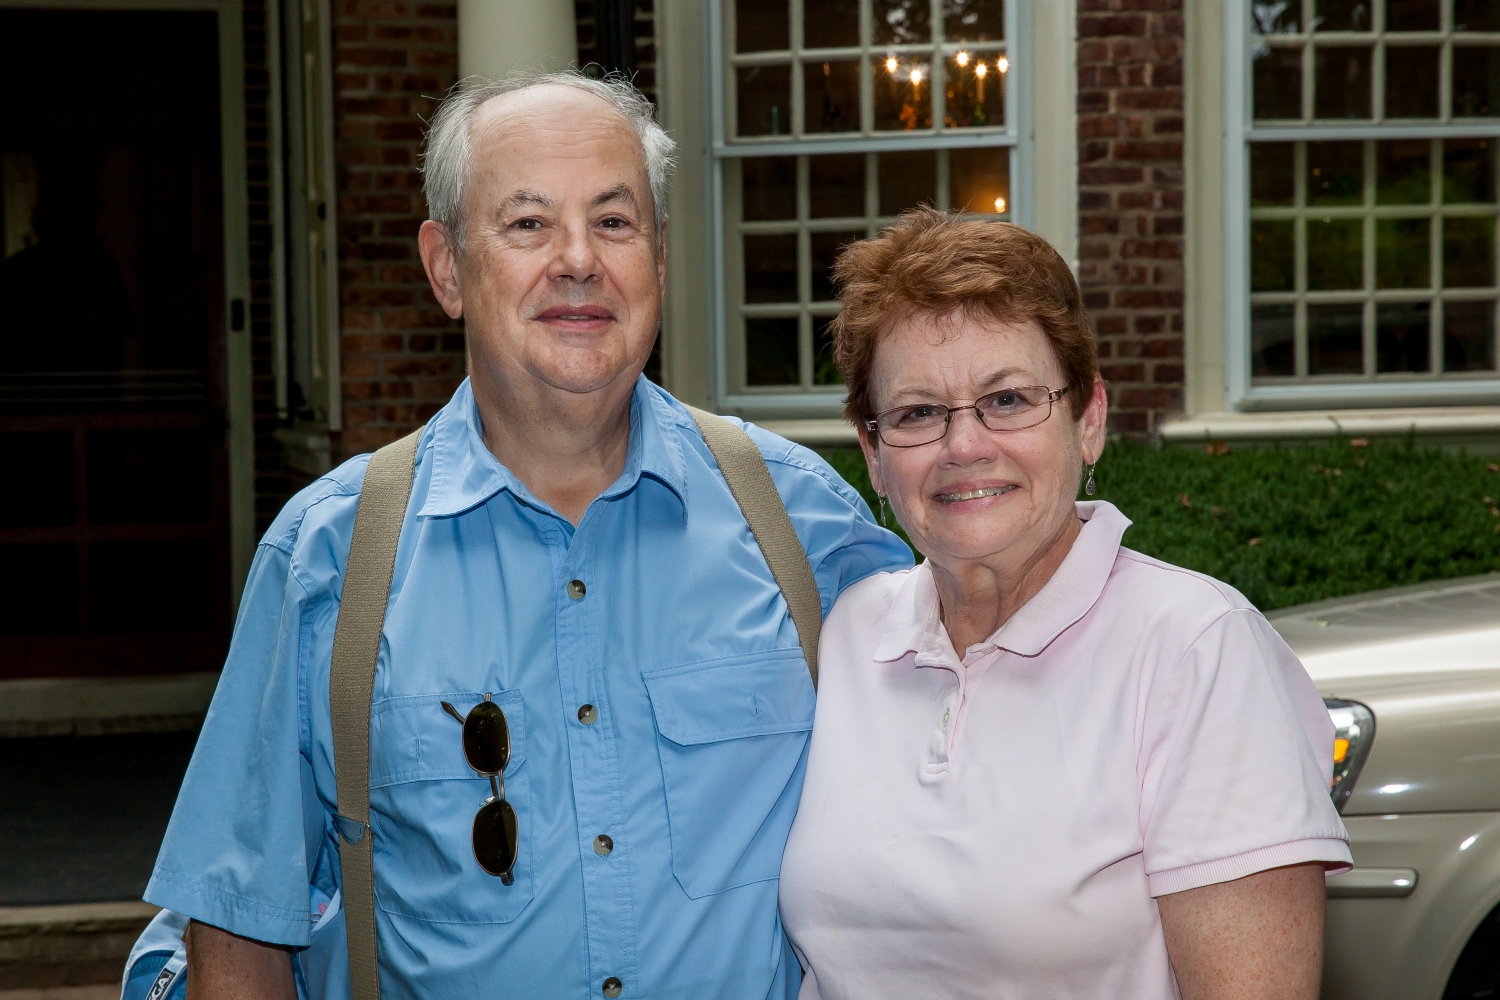 Bill and Cathy